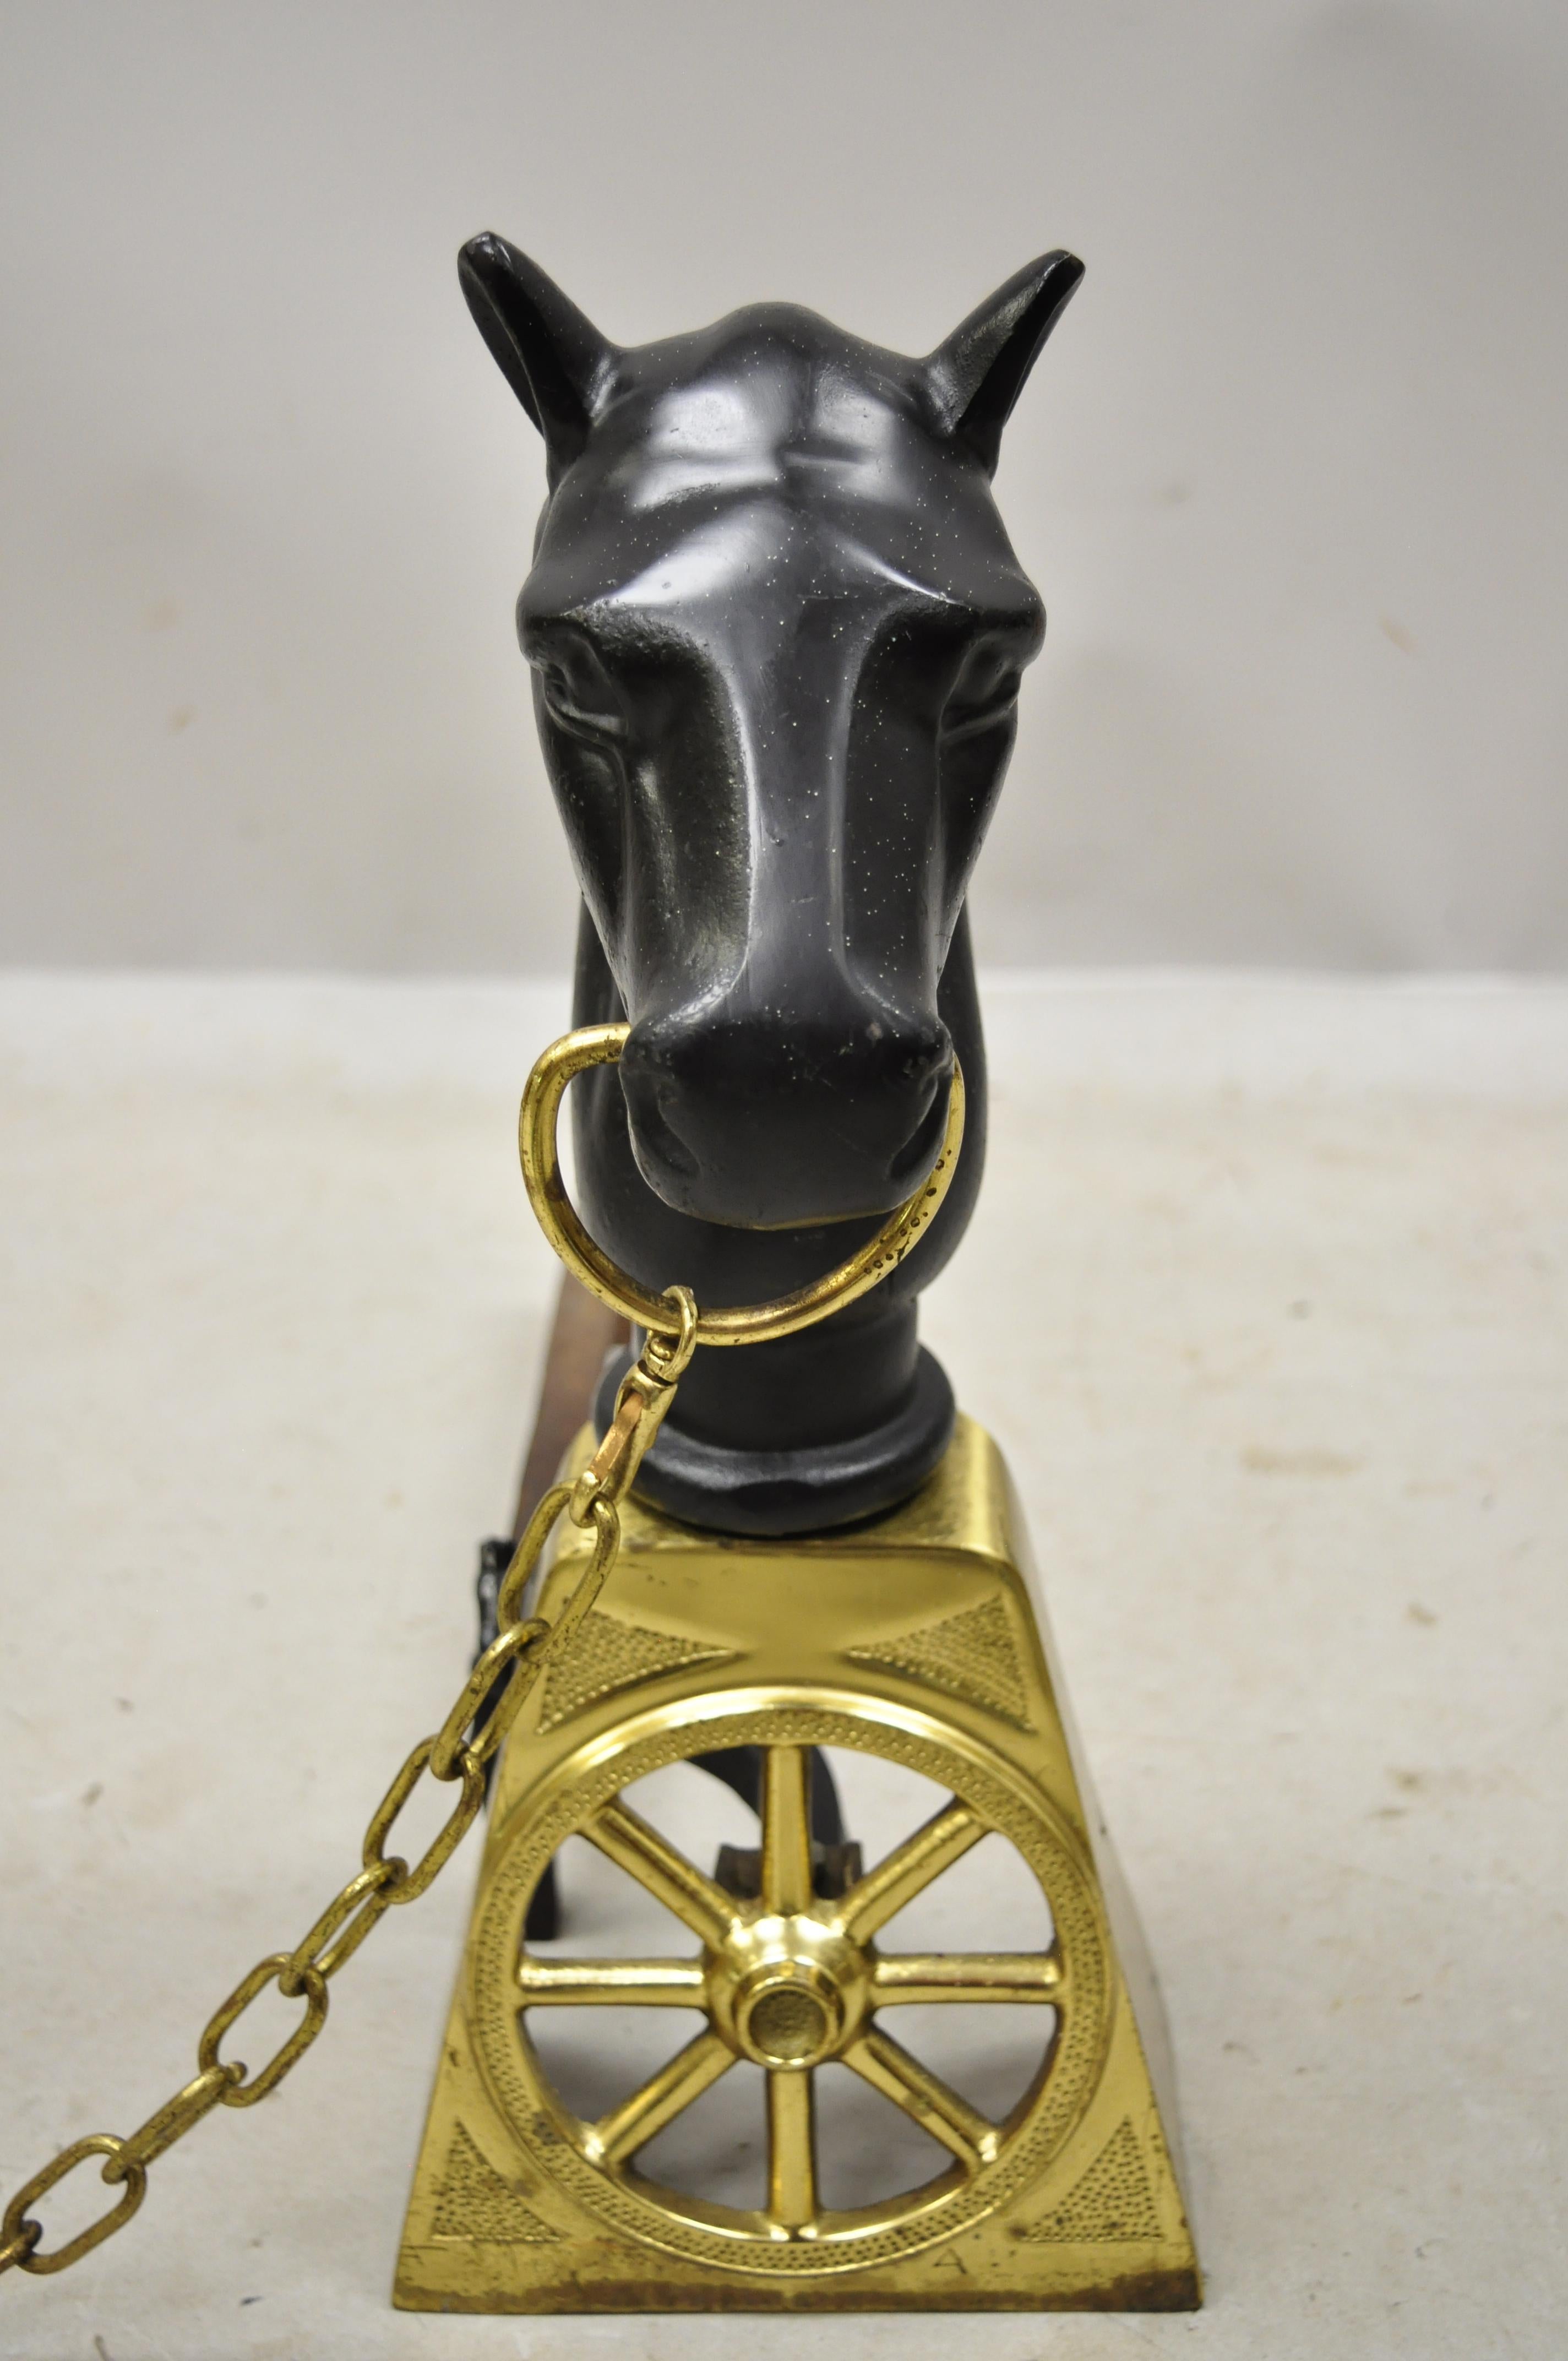 Pair of antique Sheffield cast iron and brass horse Equestrian fireplace andirons. Item features cast iron horse forms, small cast iron horse head finials, cast iron log supports, brass wagon wheel, brass chain, original stamp, very nice vintage